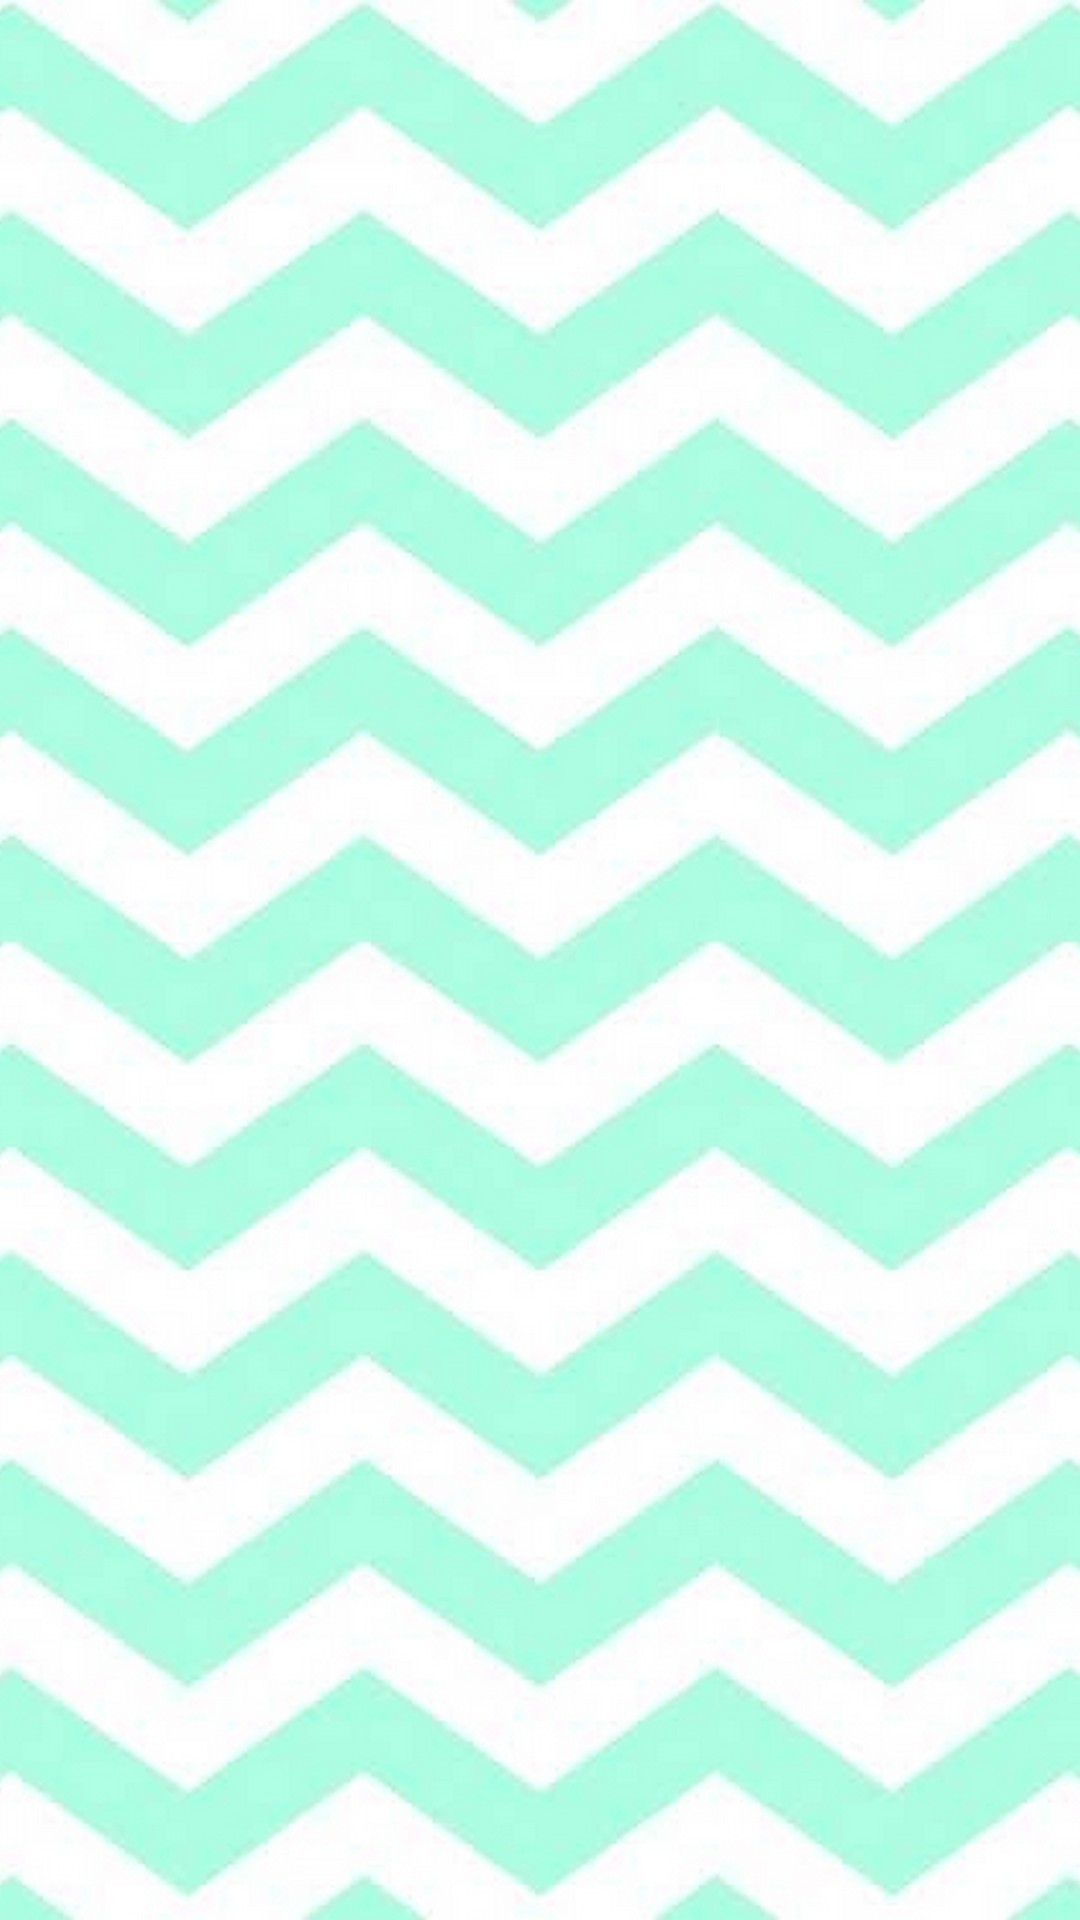 1080x1920, Mint Green Iphone 8 Wallpaper With Image - Pattern - HD Wallpaper 